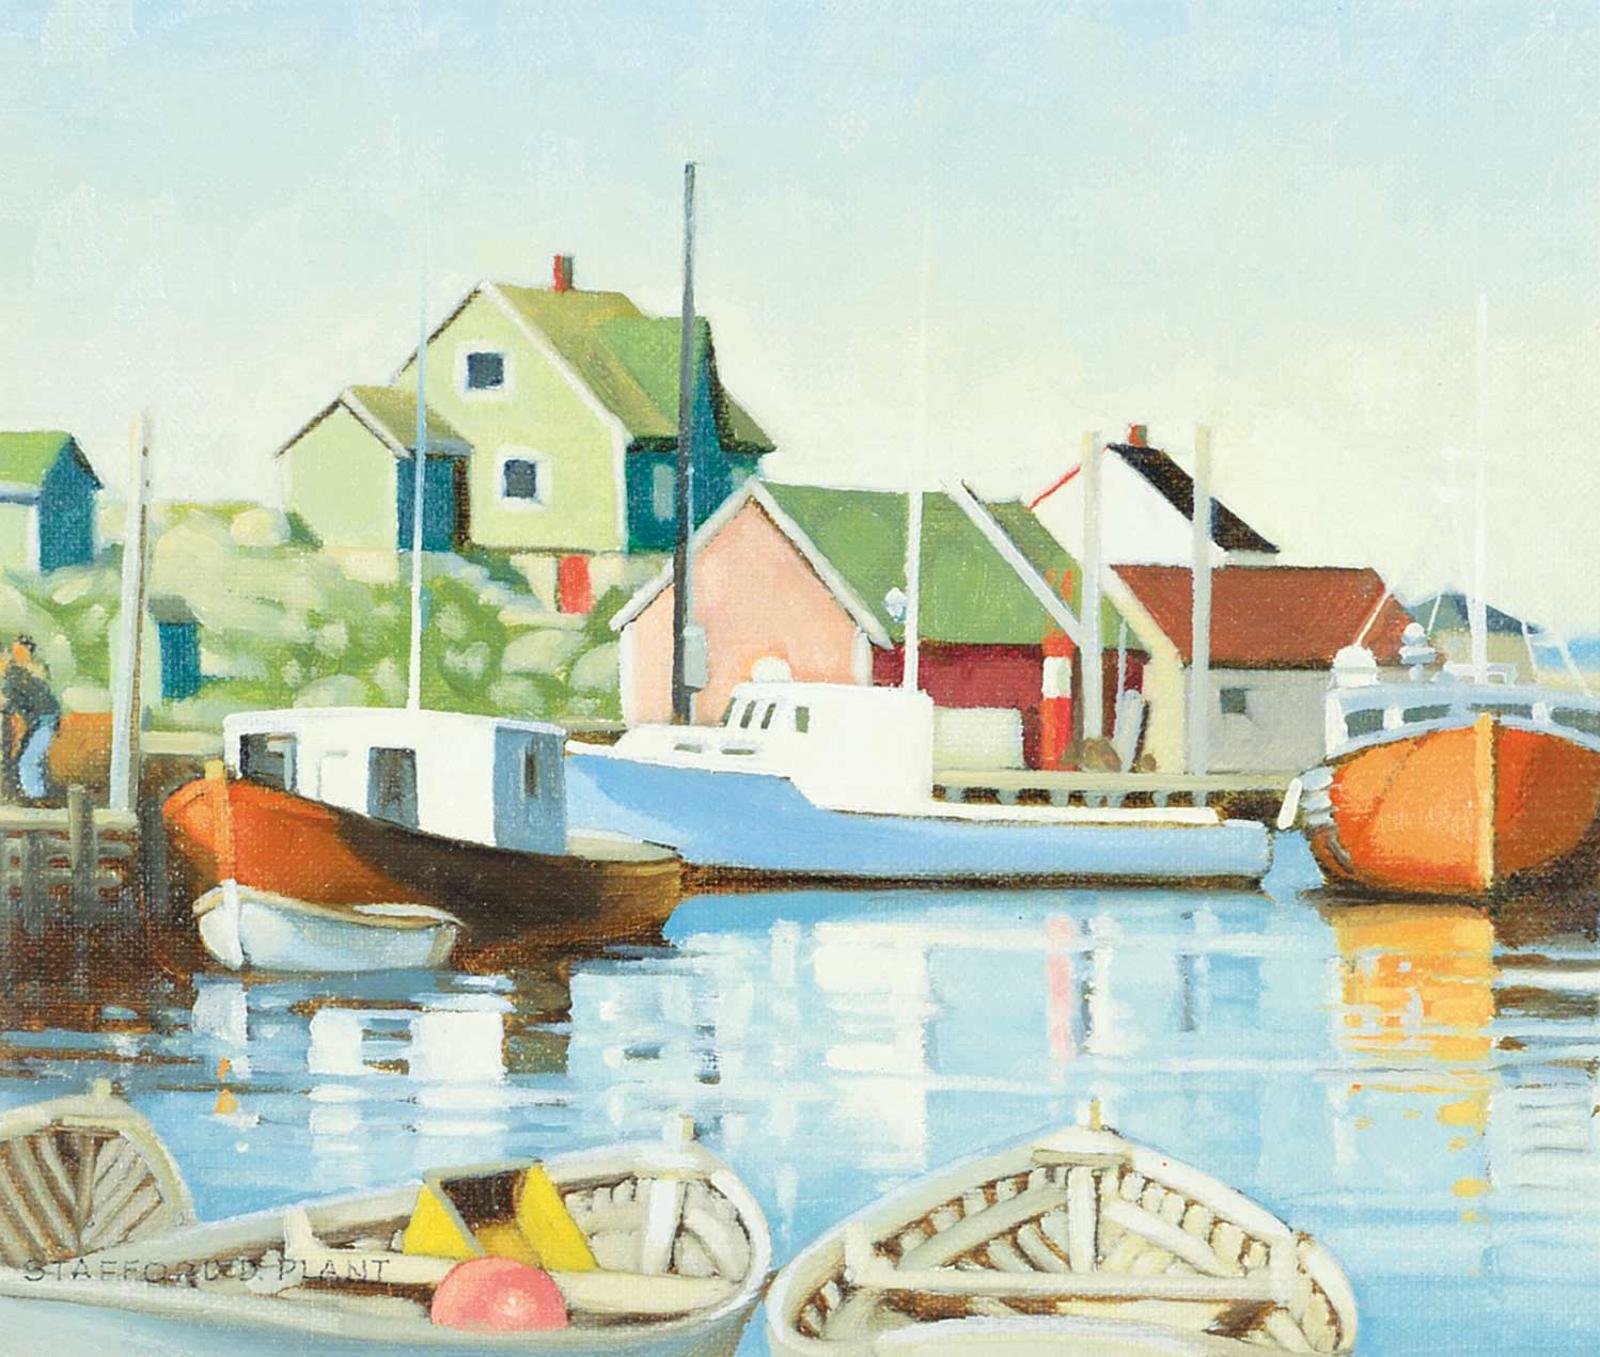 Stafford Donald Plant (1914-2000) - Artist's Paradise - Peggy's Cove